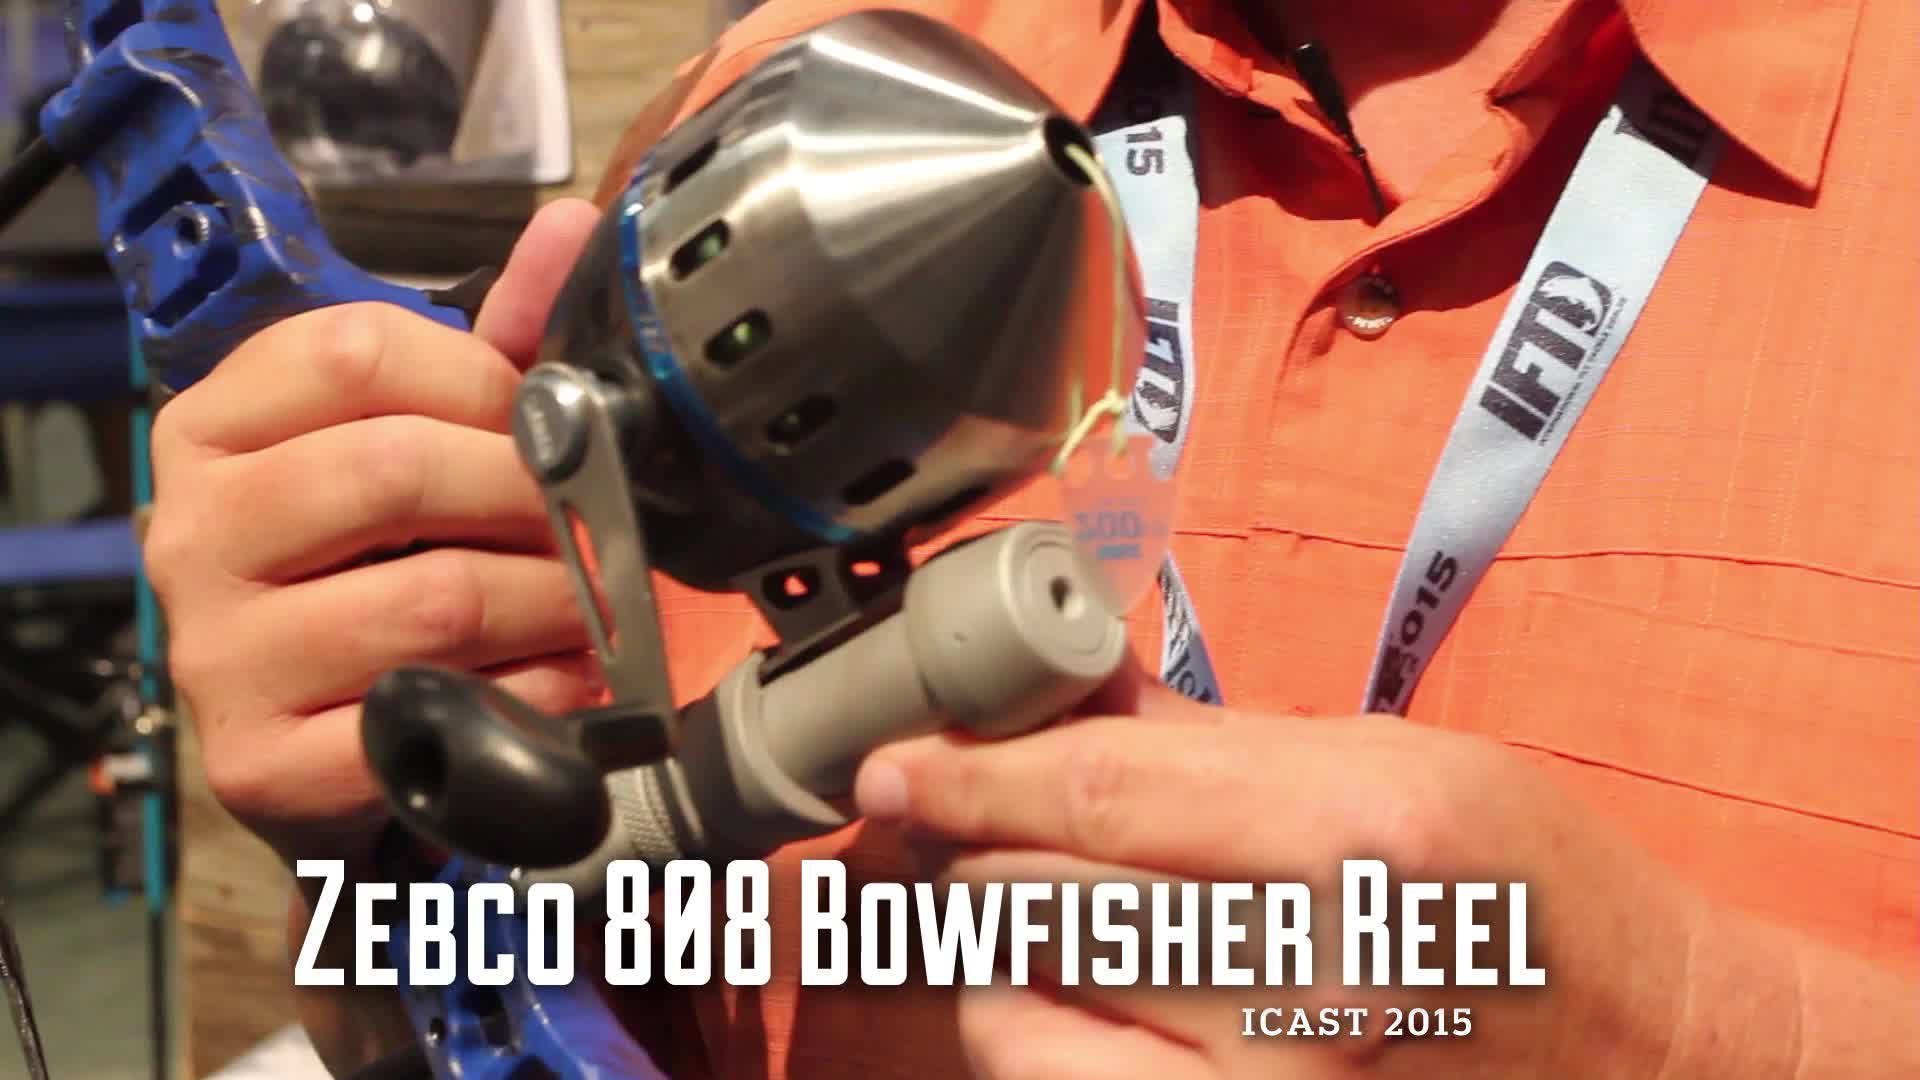 New Reel: Zebco 808 Bowfisher Spincast Reel - video Dailymotion